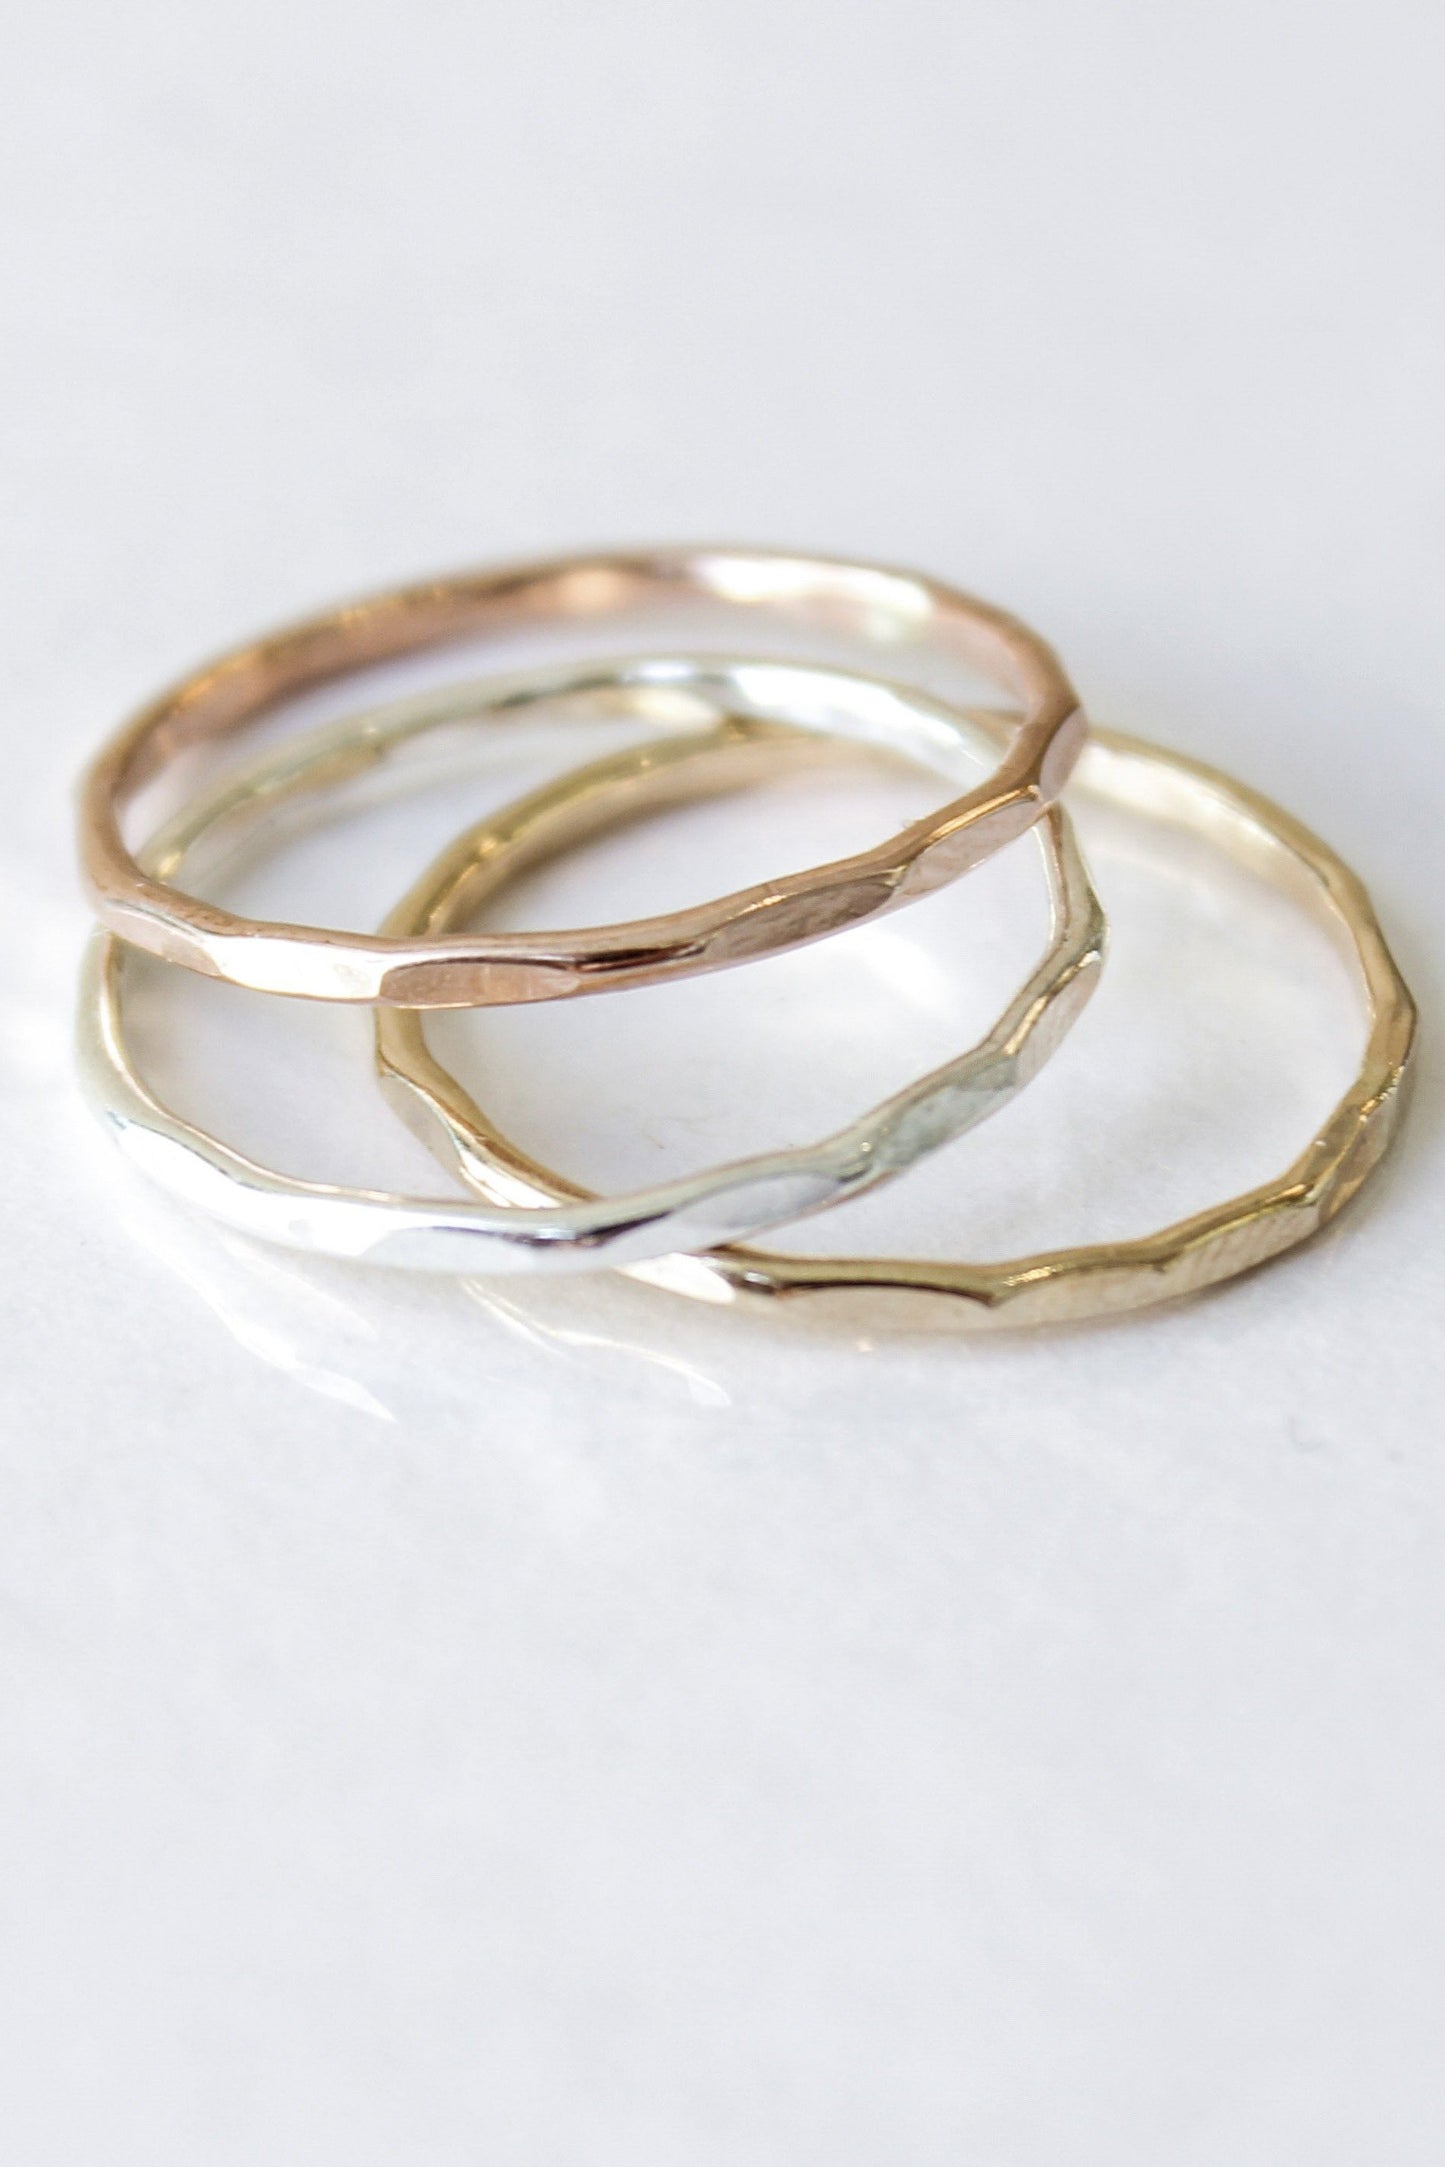 Hammered Mixed Metal Triple Stacking Rings